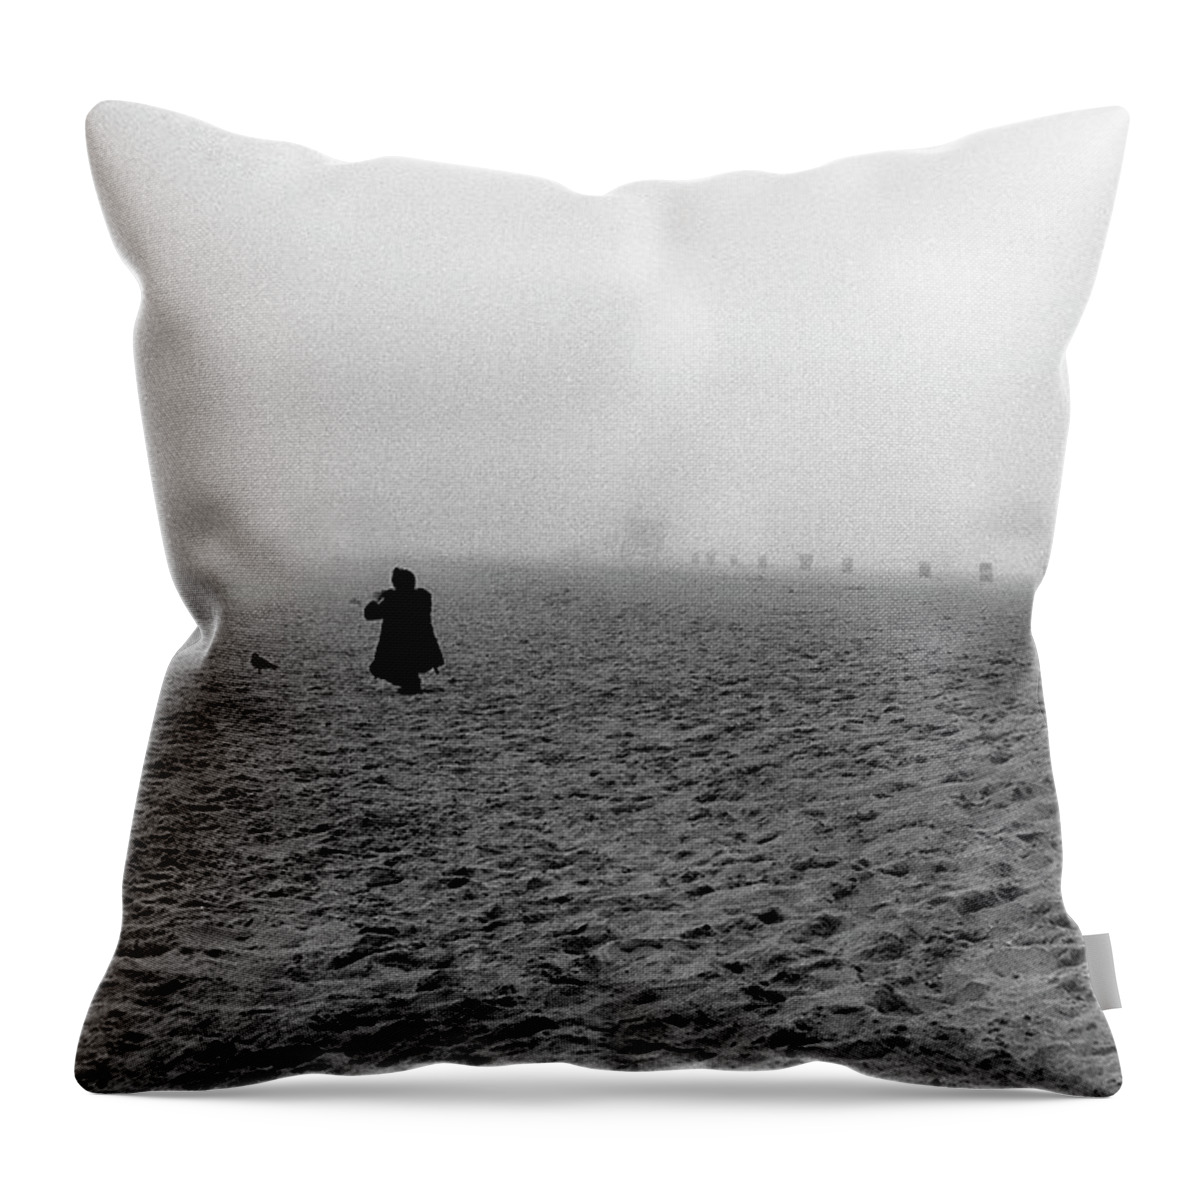 People Throw Pillow featuring the photograph Beach In Winter by Phuong Nguyen